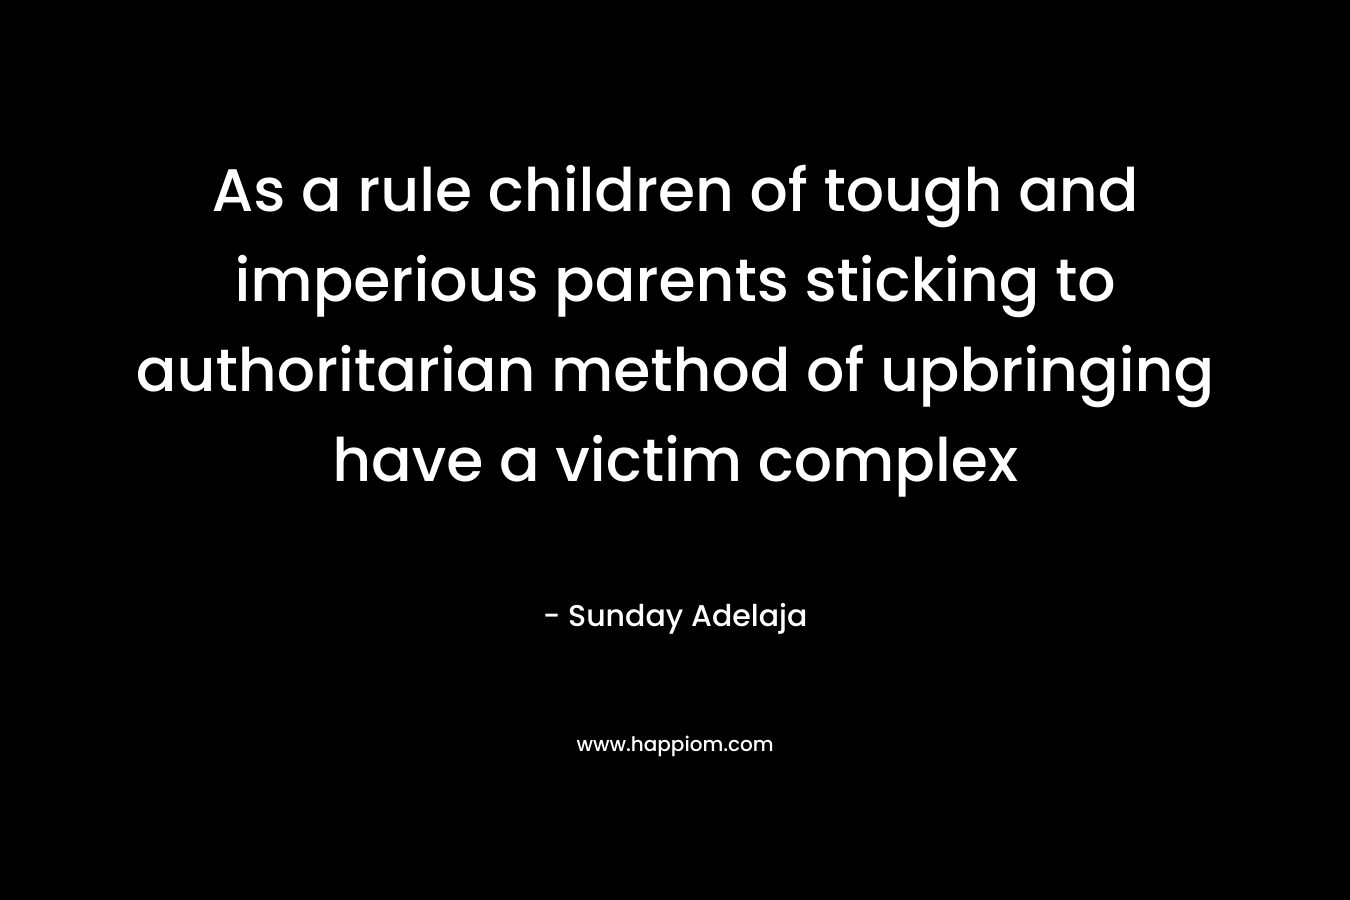 As a rule children of tough and imperious parents sticking to authoritarian method of upbringing have a victim complex